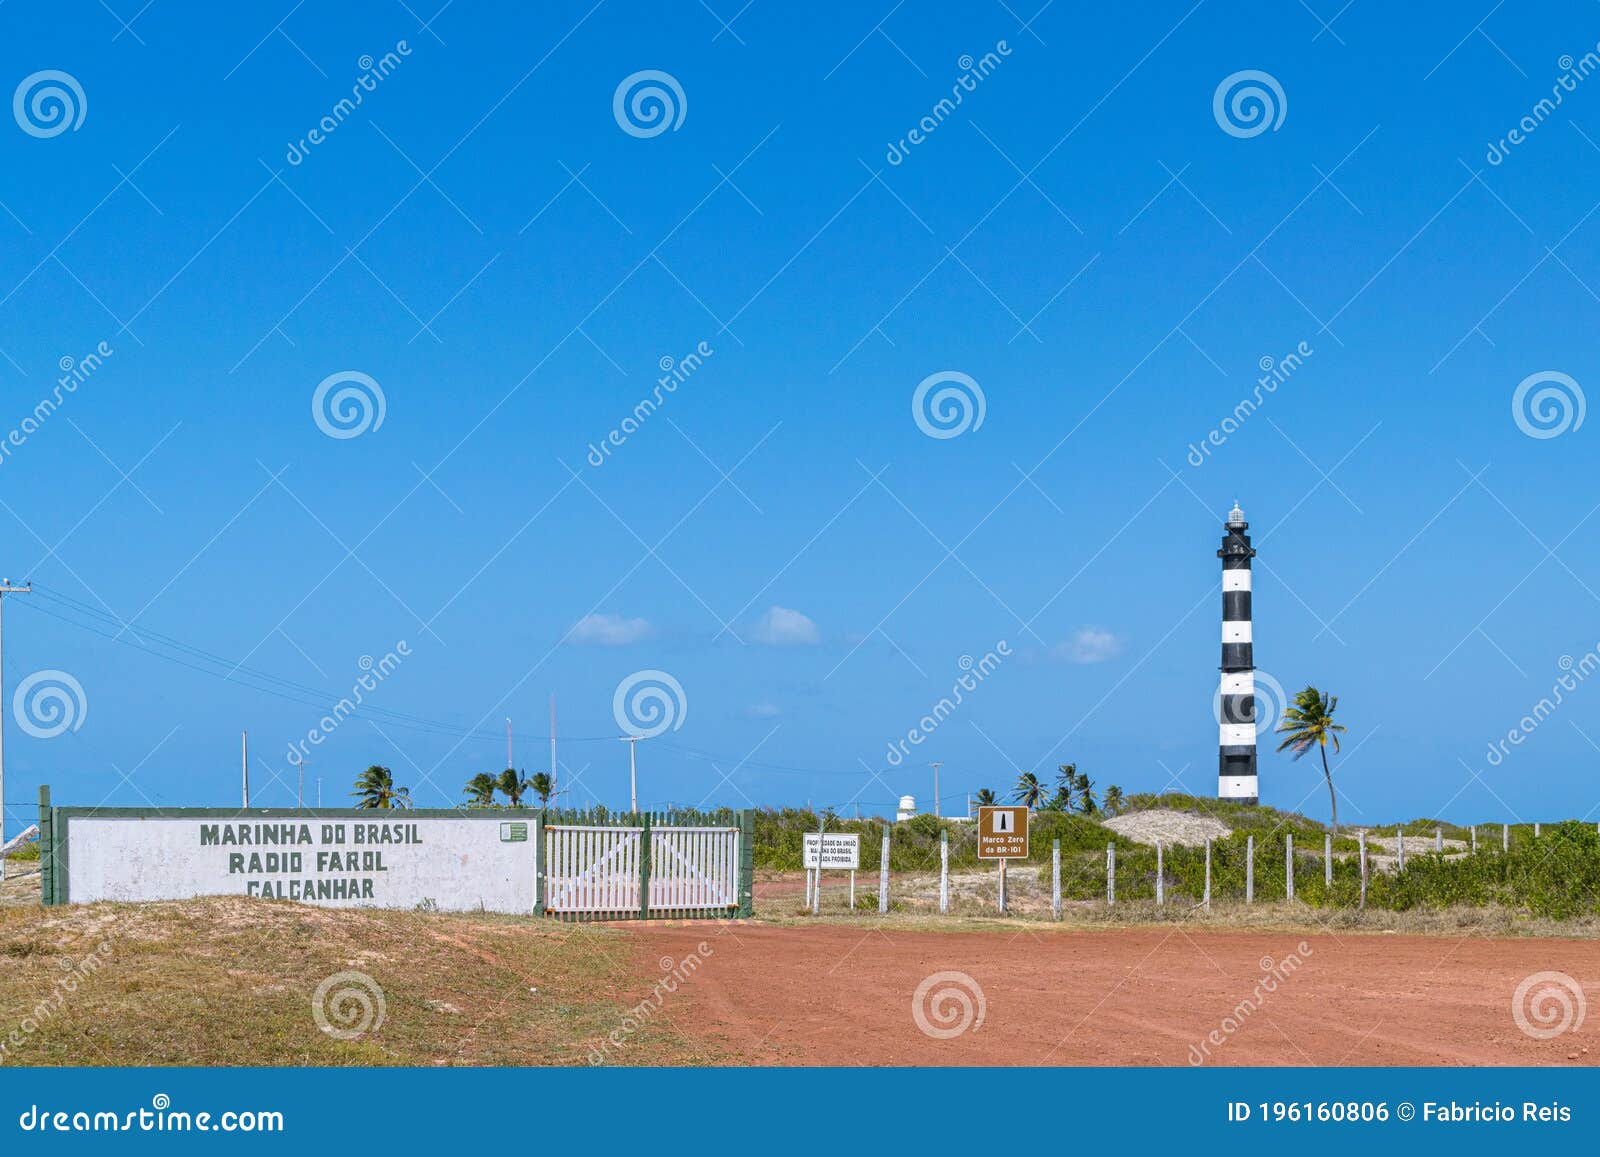 the calcanhar lighthouse and the beginning of the br-101, the largest highway in brazil.